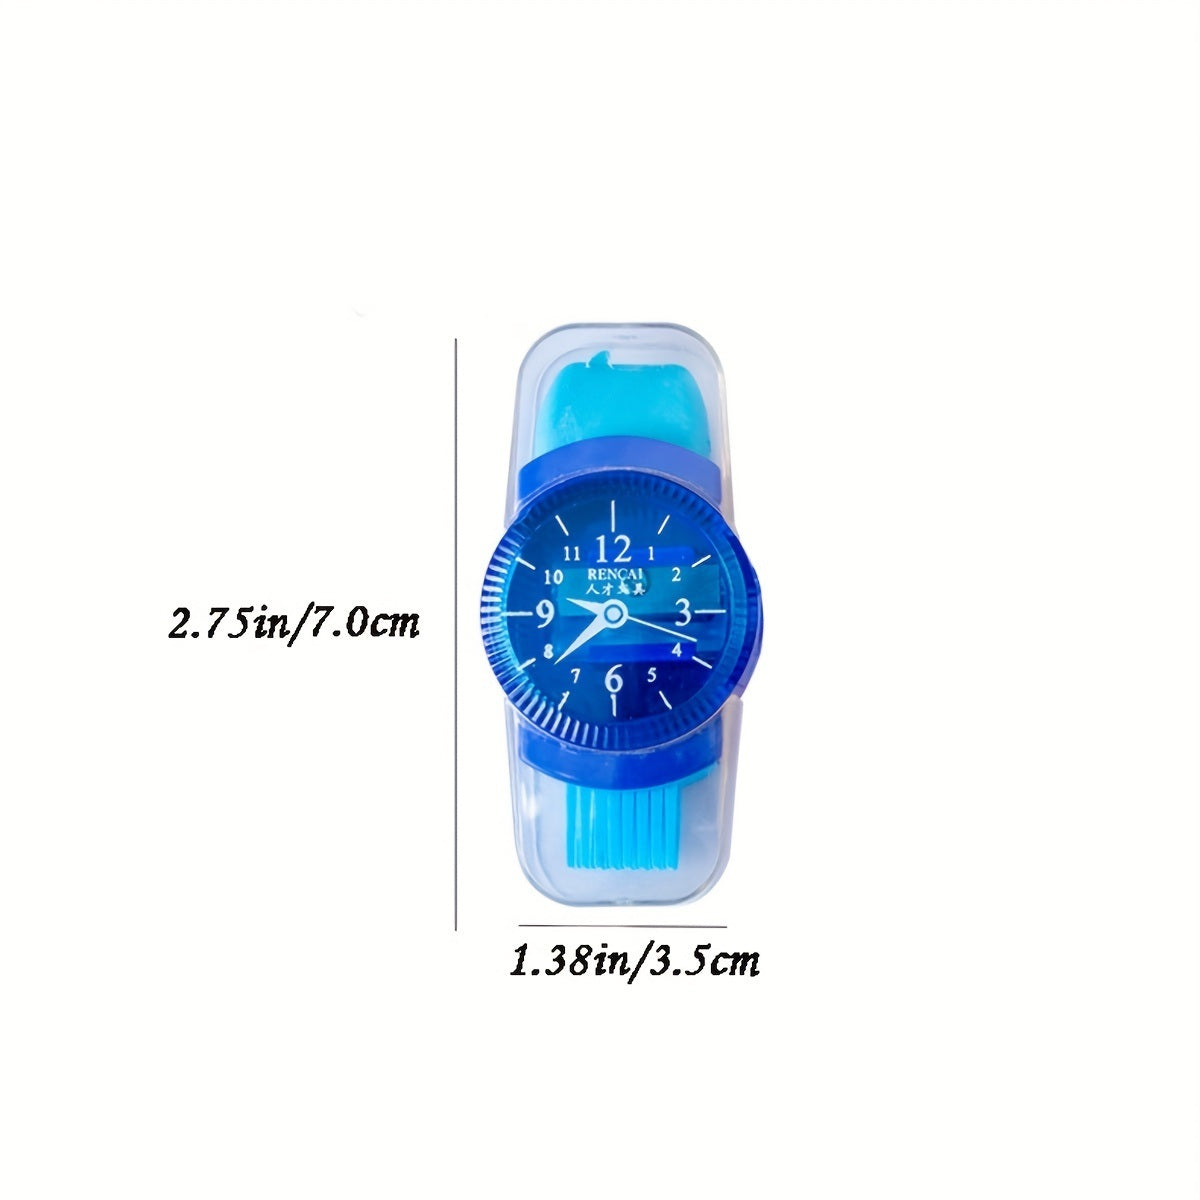 Four 4pcs Creative Watch Shape Pencil Sharpeners with translucent bands are elegantly displayed in a row against a light background. Each sharpener features a distinctively colored strap and matching dial, designed to complement any outfit stylishly.